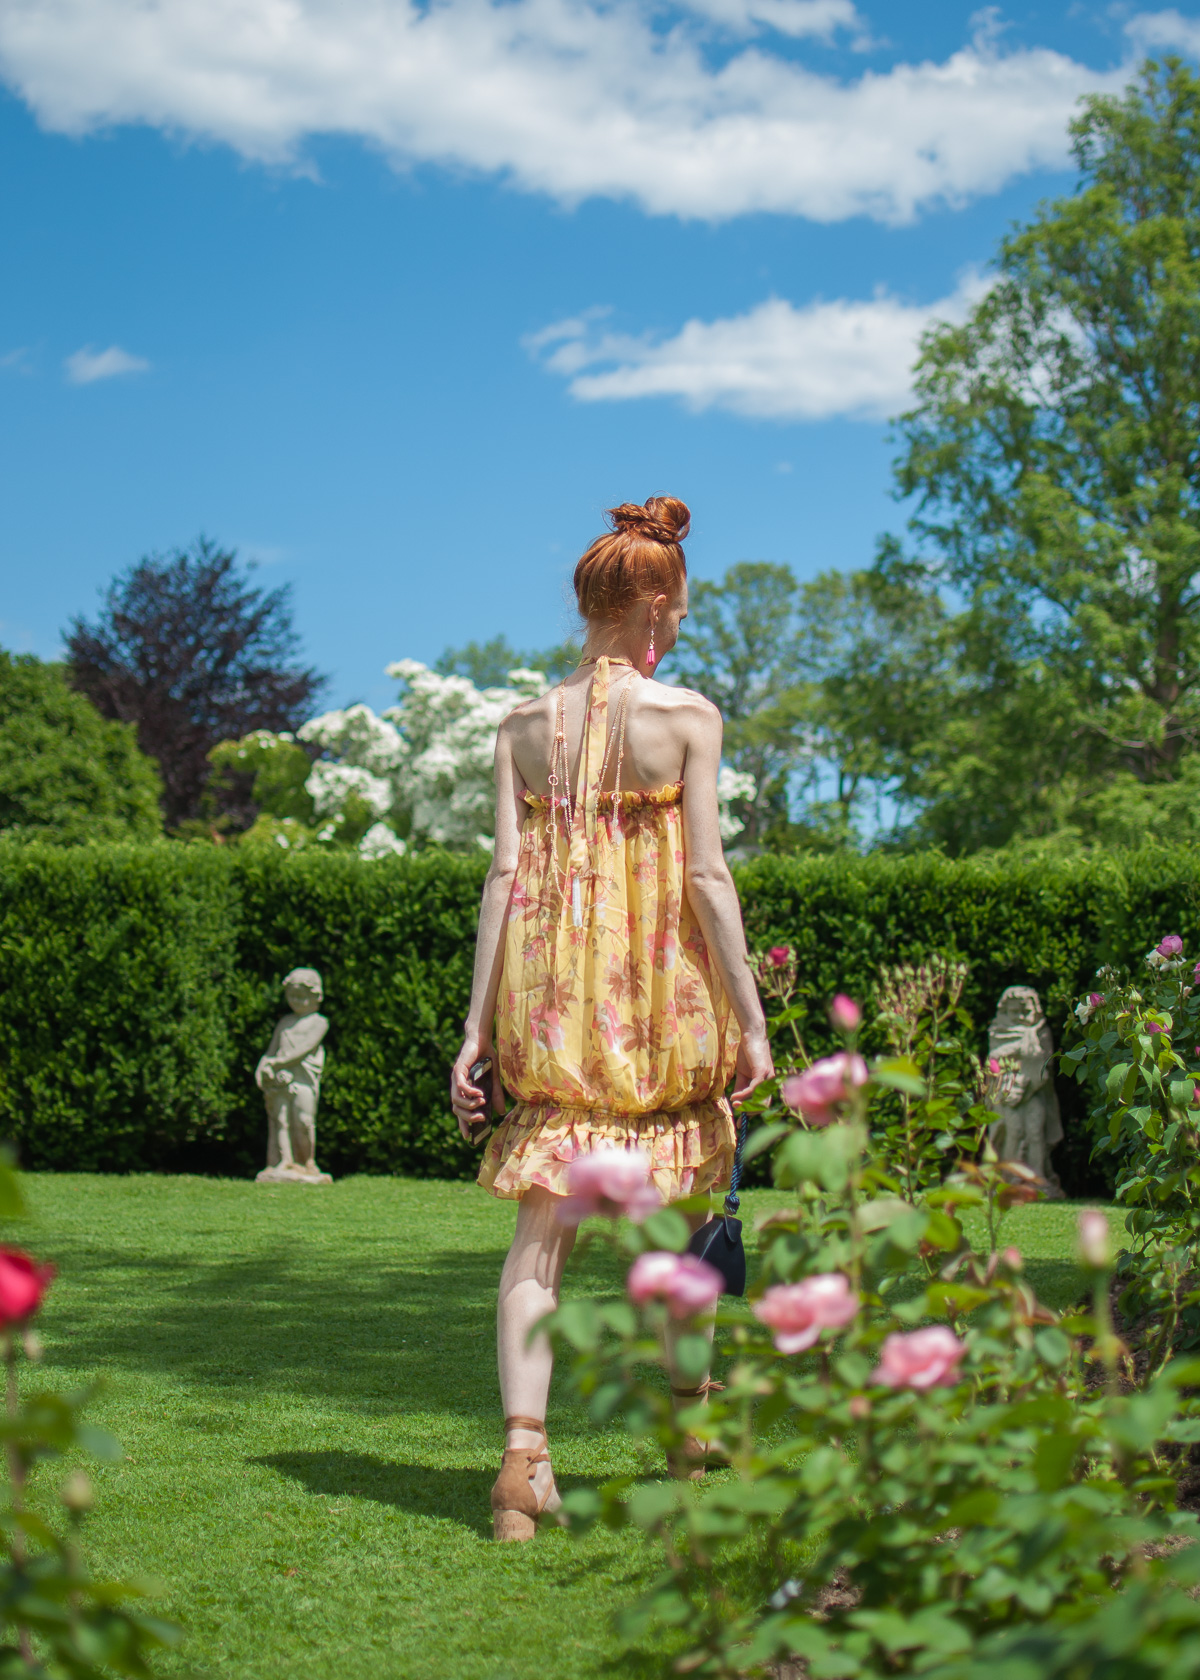 blogger Mary O'Neill touring Fuller Gardens in New Hampshire